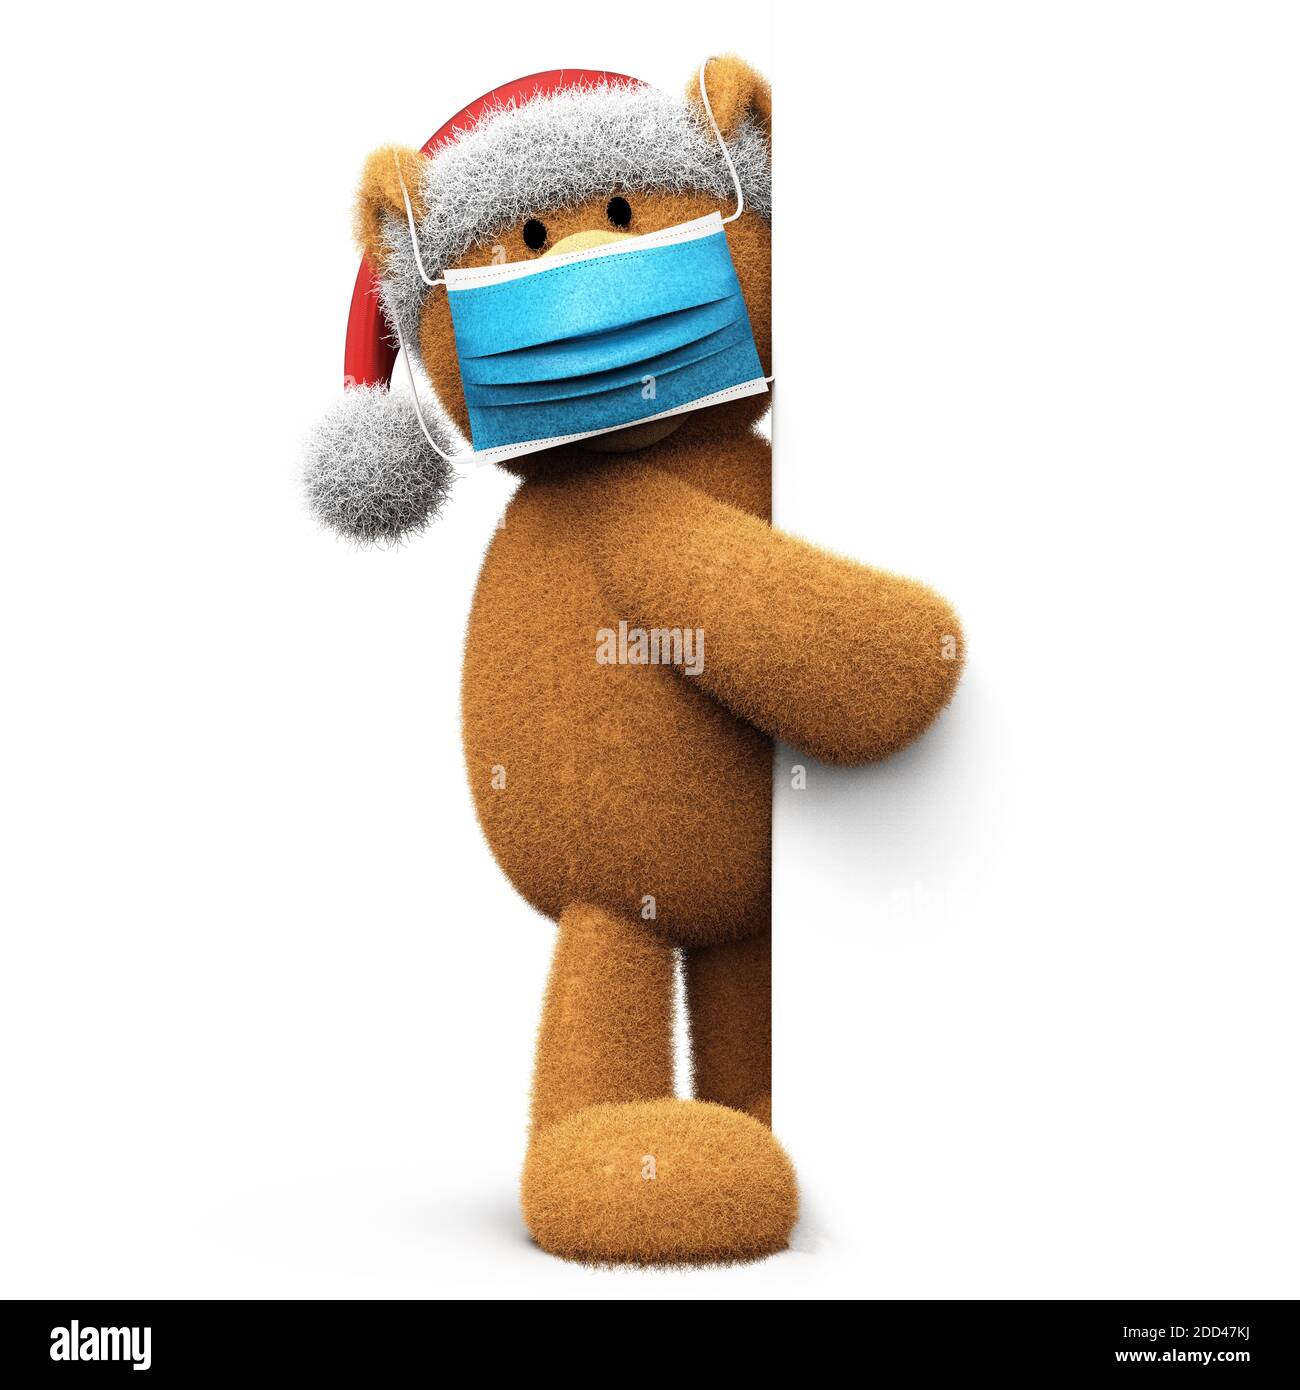 Christmas Teddy bear with Santa Claus hat and surgical masks to prevent corona COVID-19 infection, isolated on white background 3D rendering Stock Photo